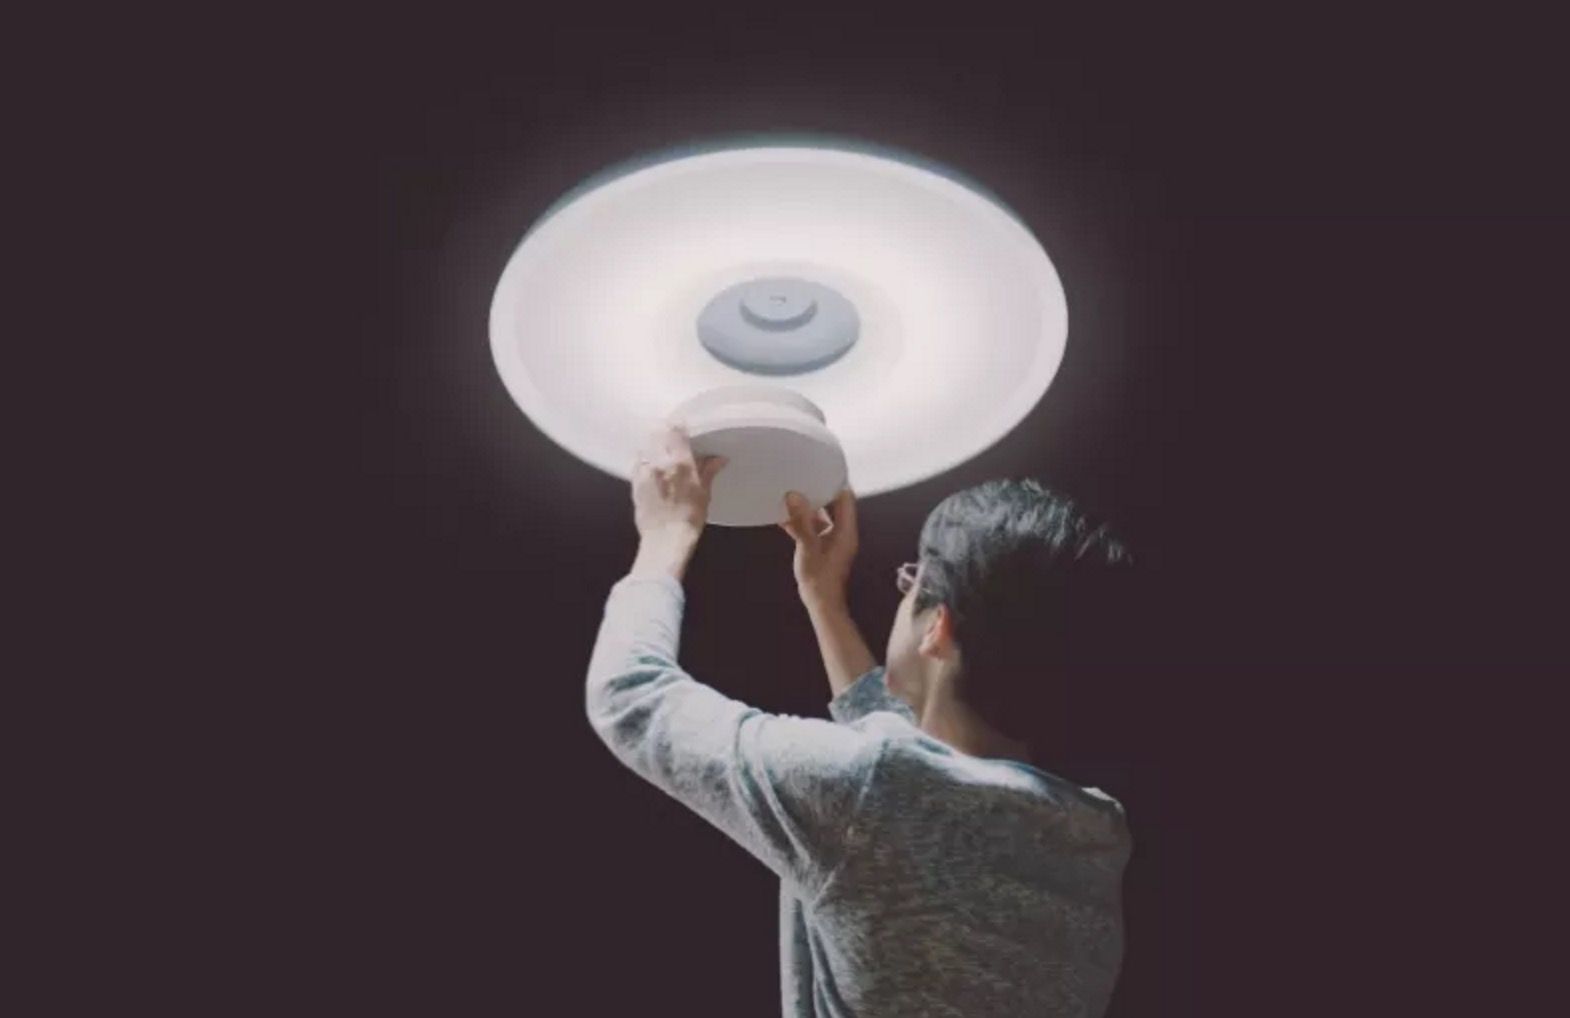 sony threw everything but the kitchen sink into this smart light image 1